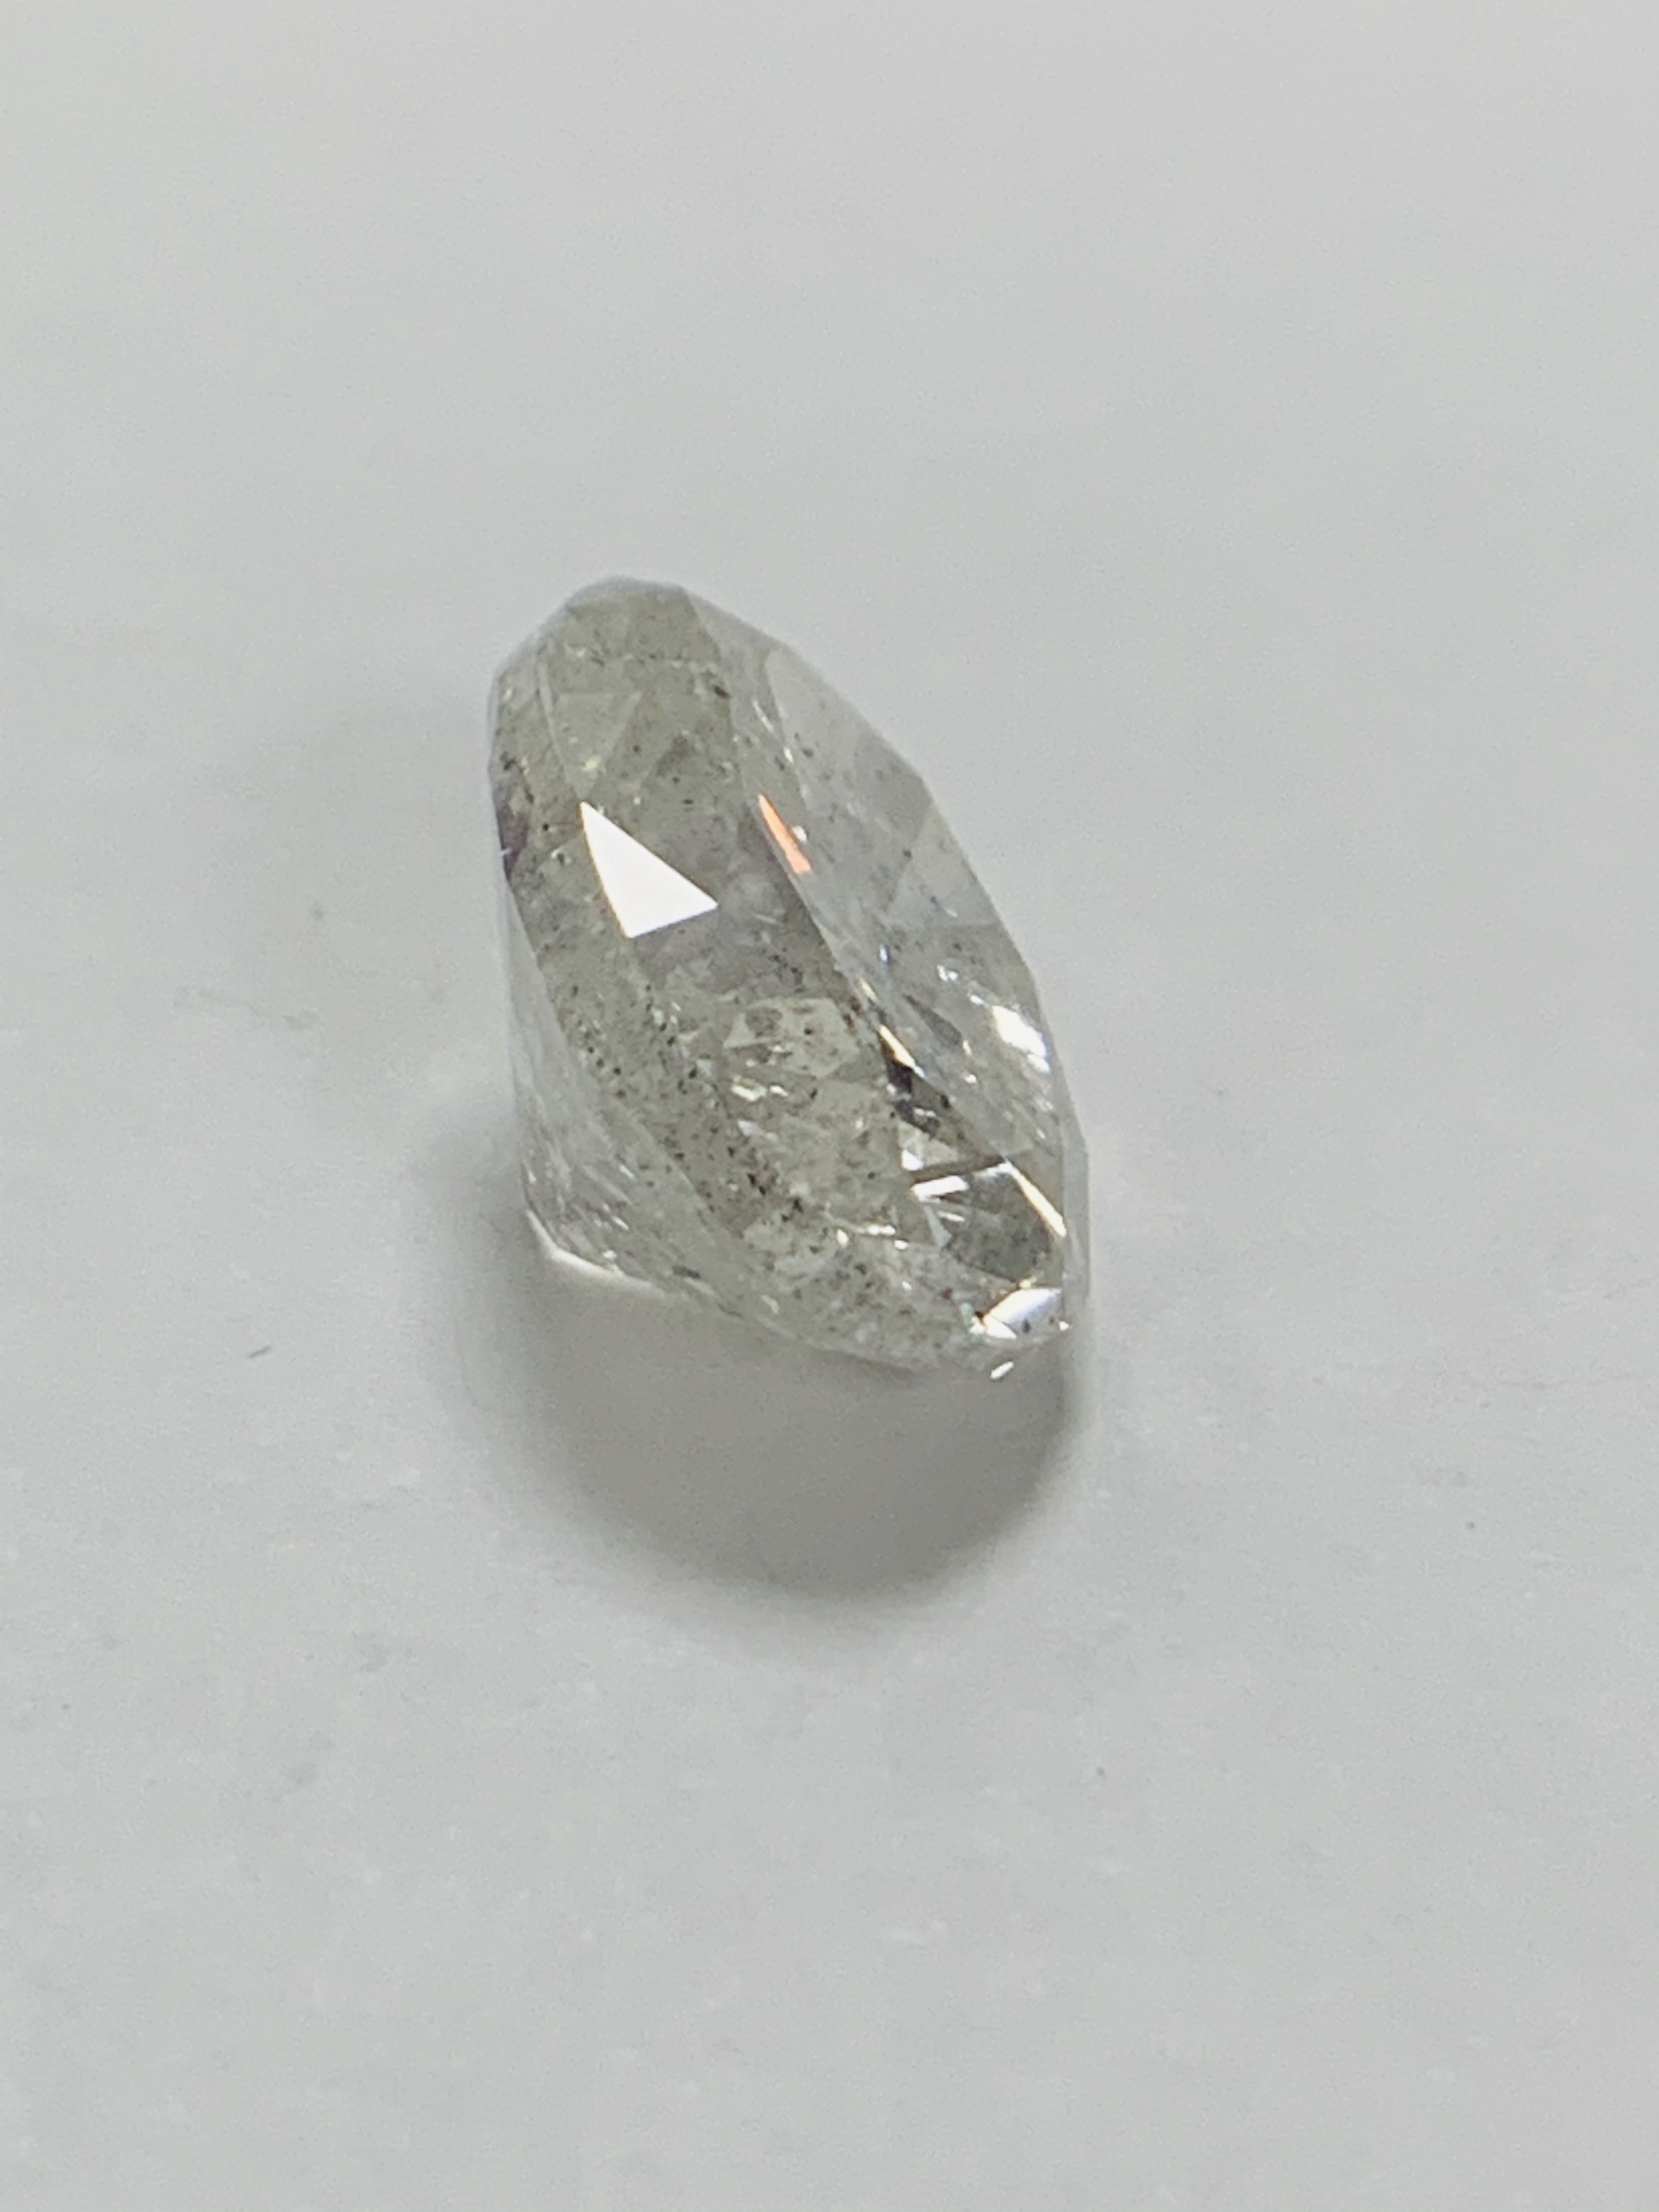 10.02ct oval cut natural diamond - Image 6 of 9